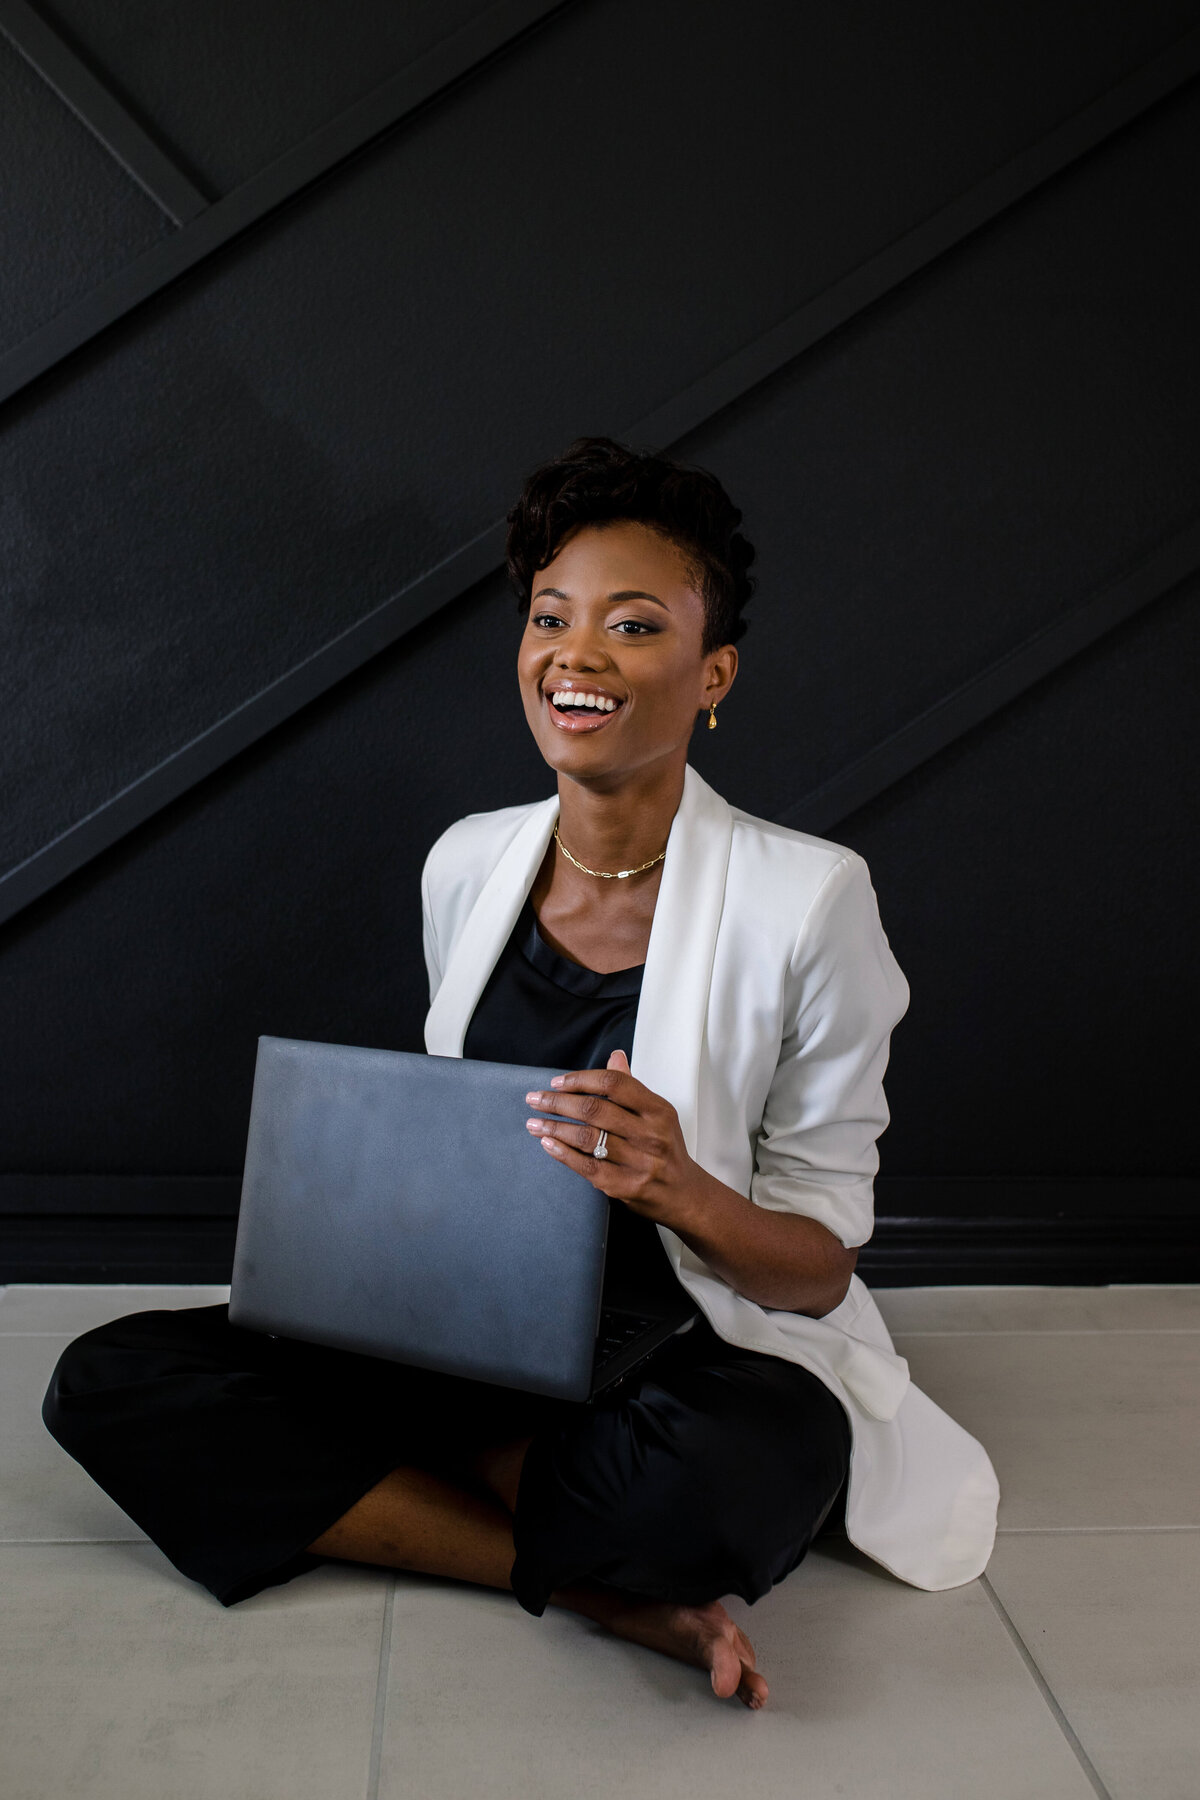 Branding photo shoot with candid brand photo of women laughing as she works on her desk pop while sitting down with a black background